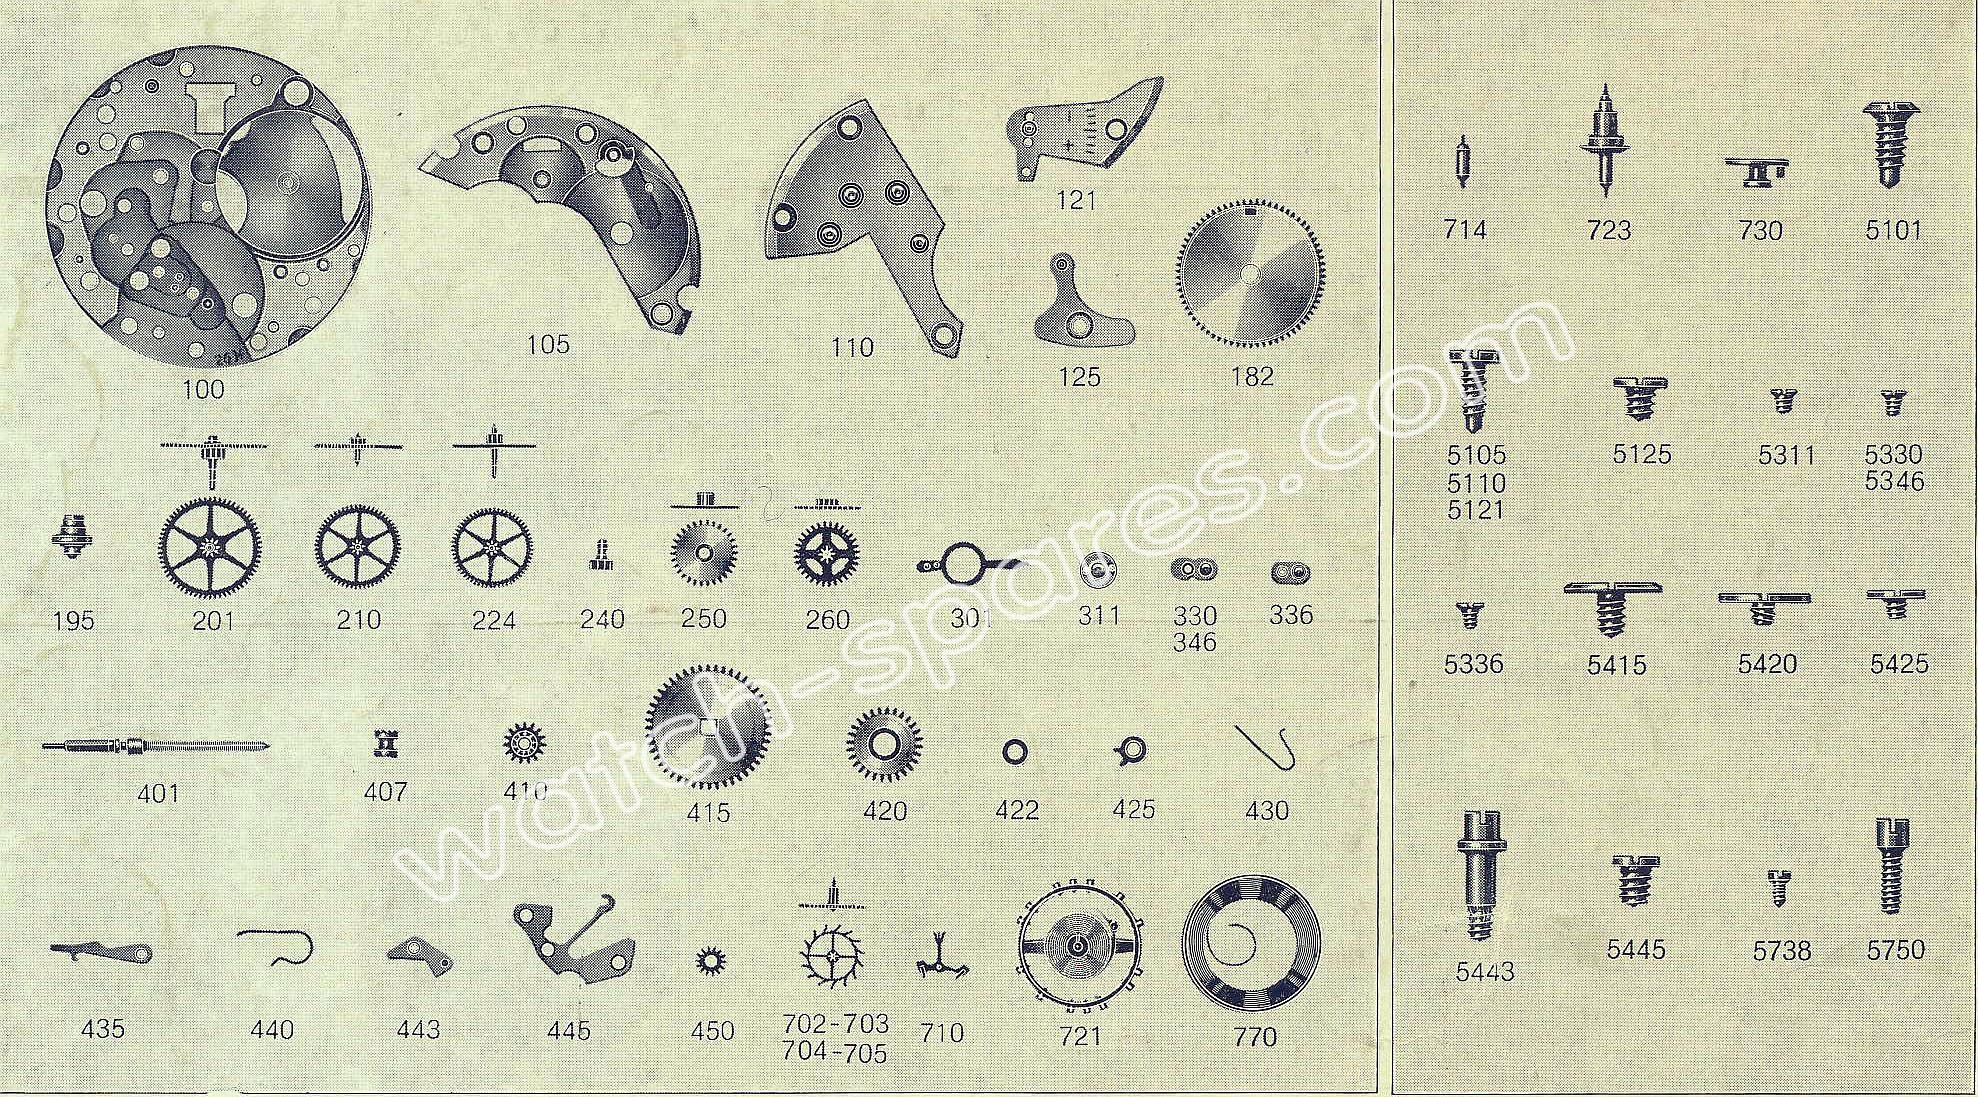 FHF Font 26 watch spare parts